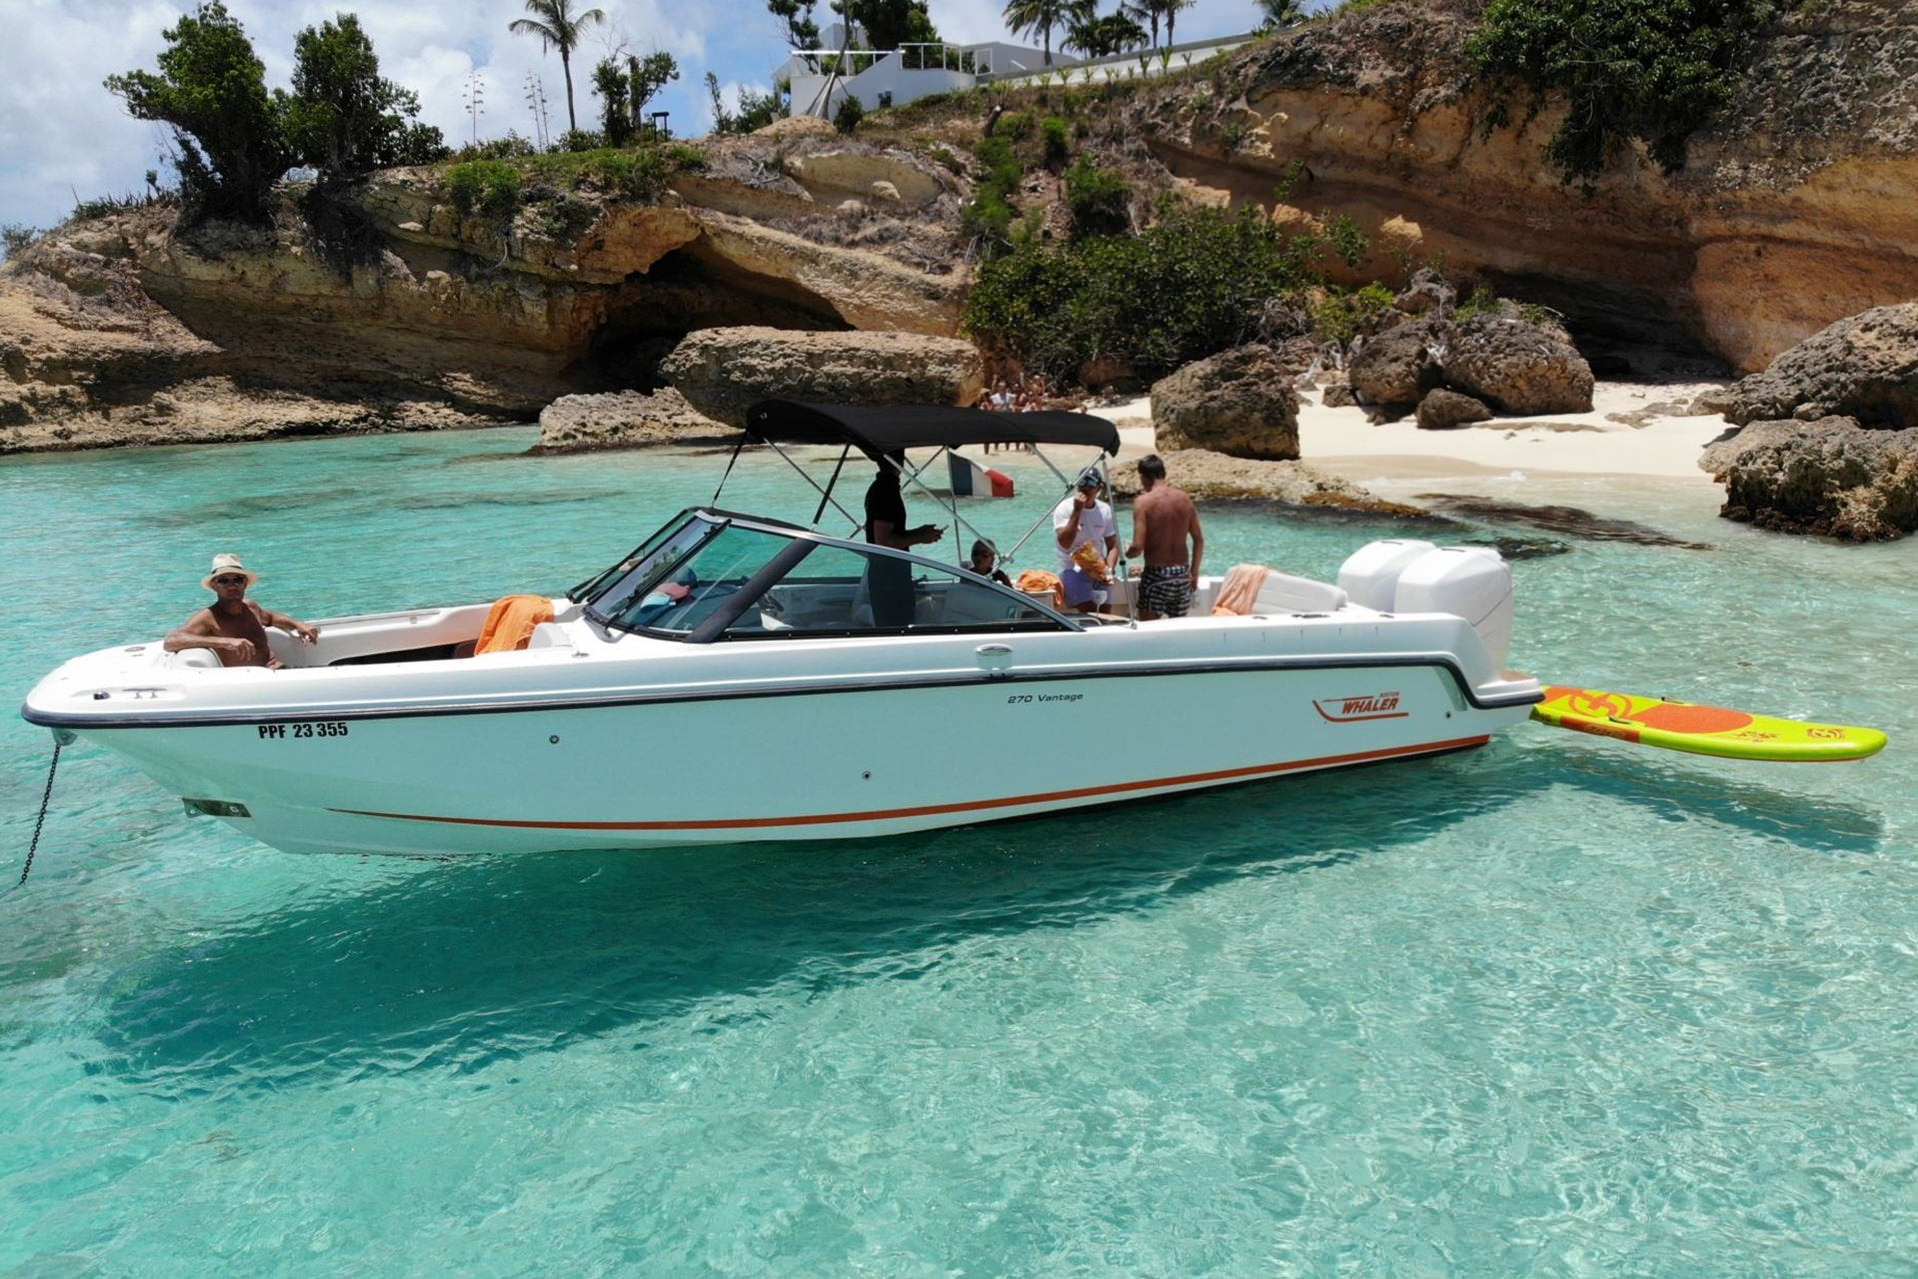 The Boston Whaler 27 is an elegantly designed yacht, with clean lines.